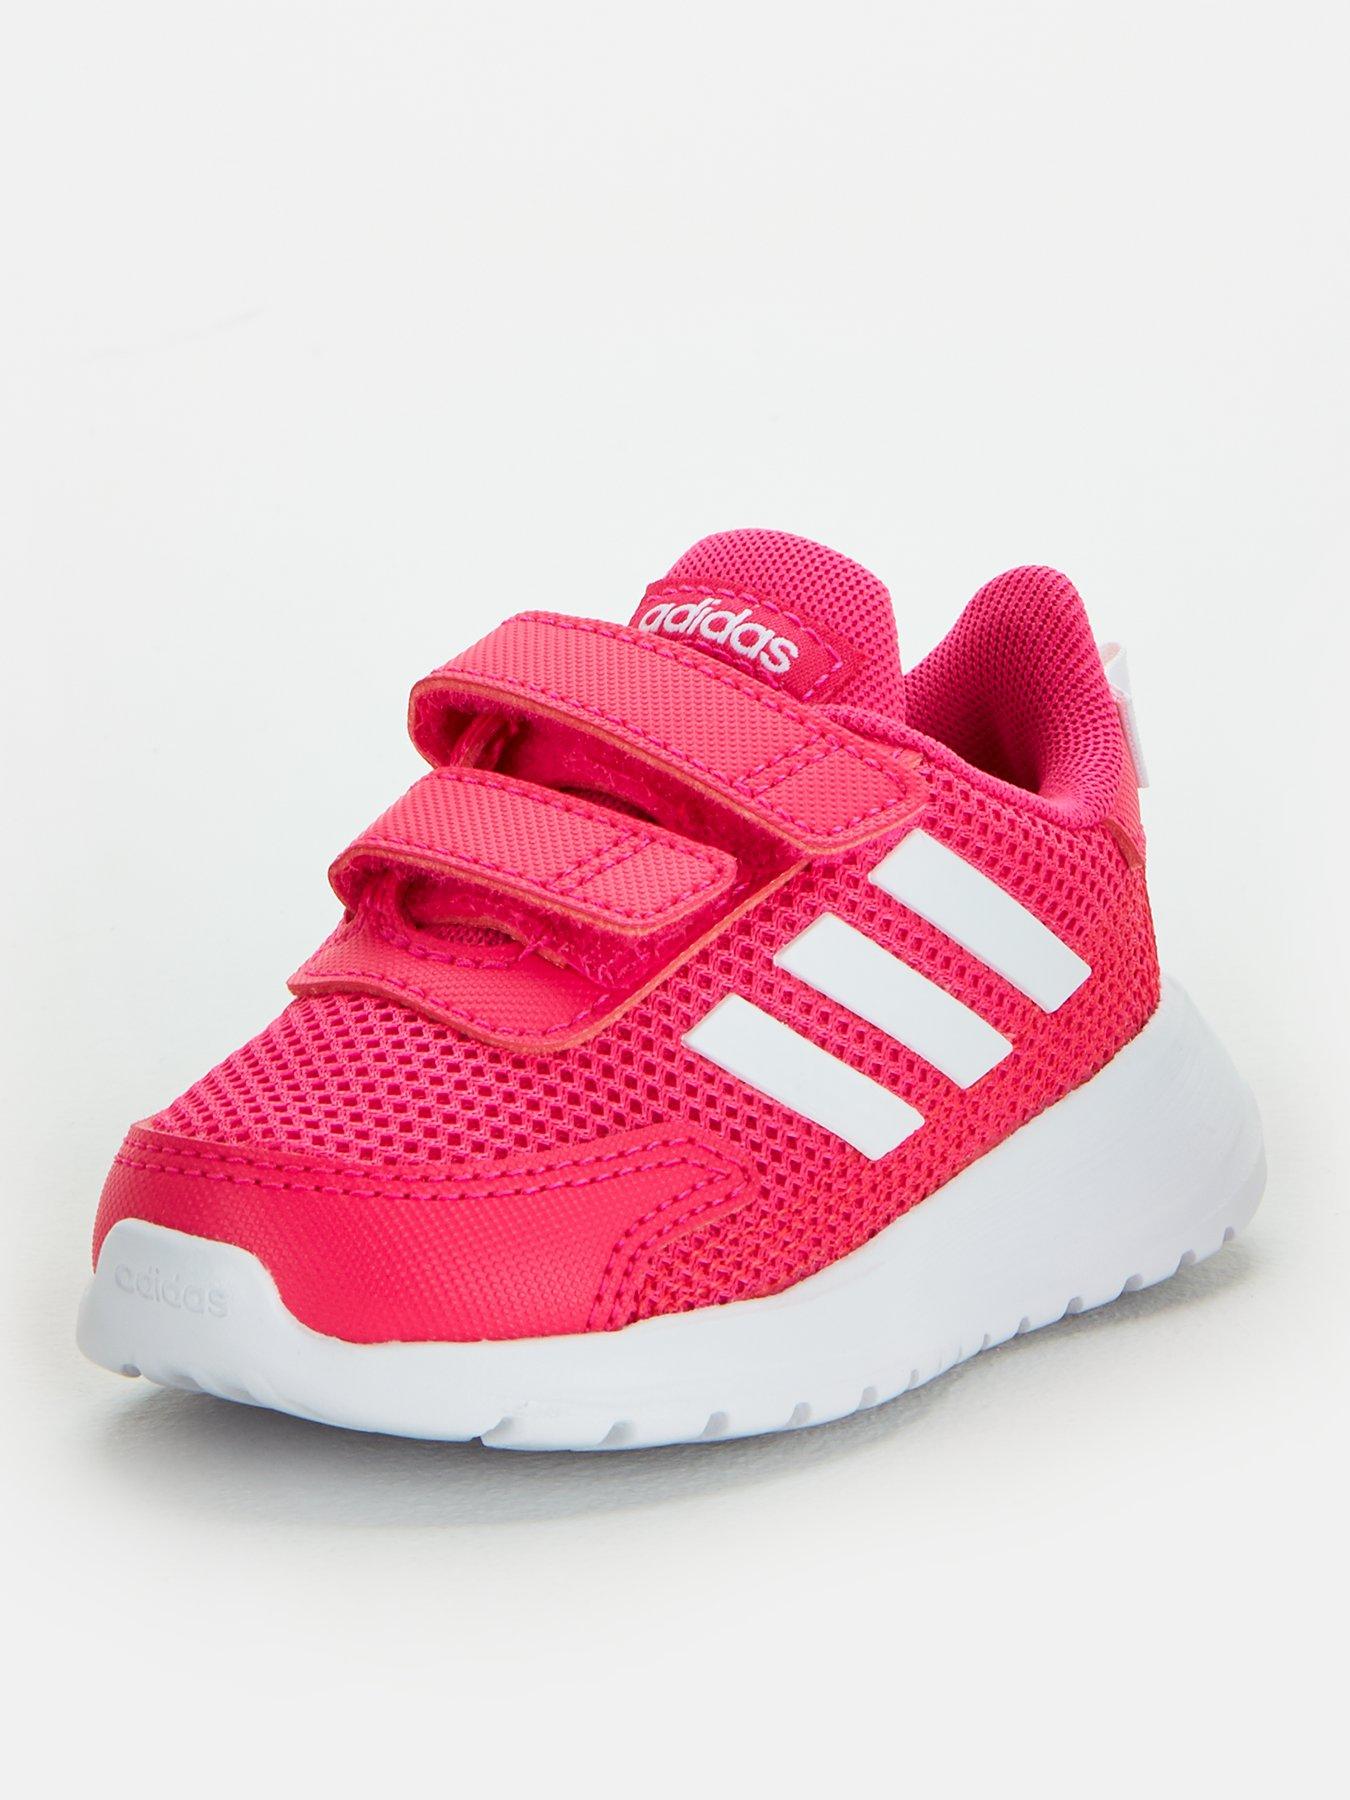 infant pink adidas trainers